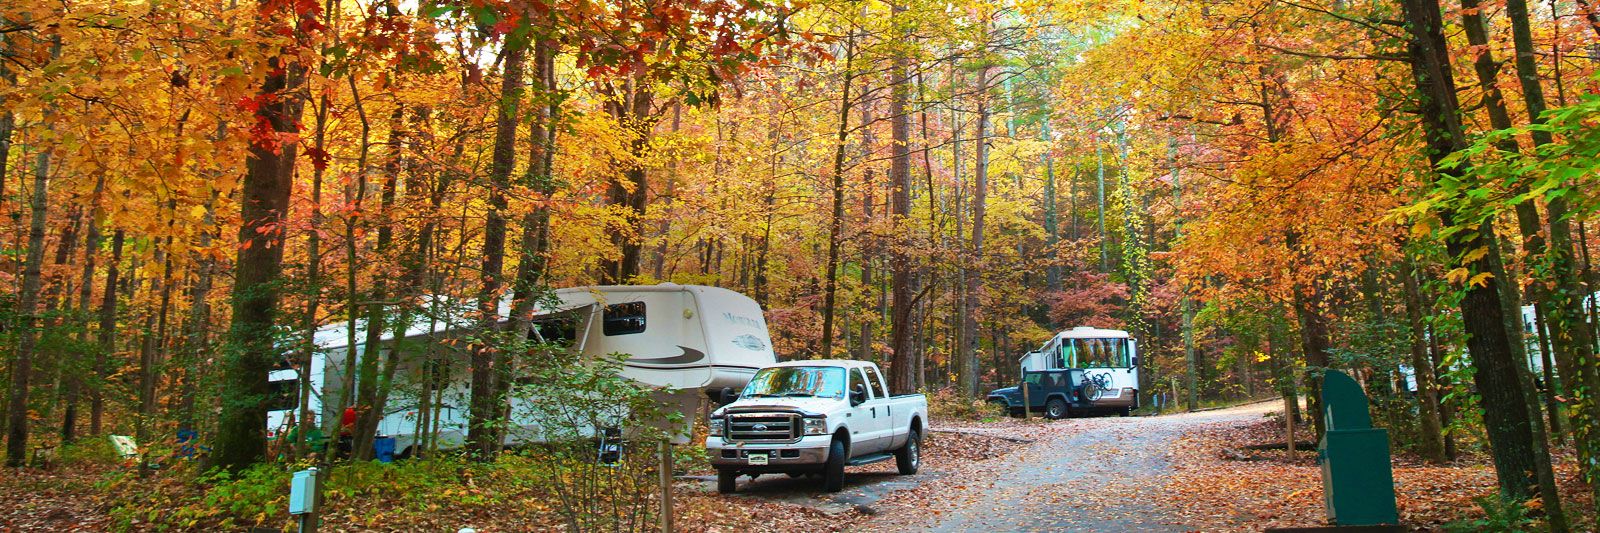 10 Tips For Camping This Fall